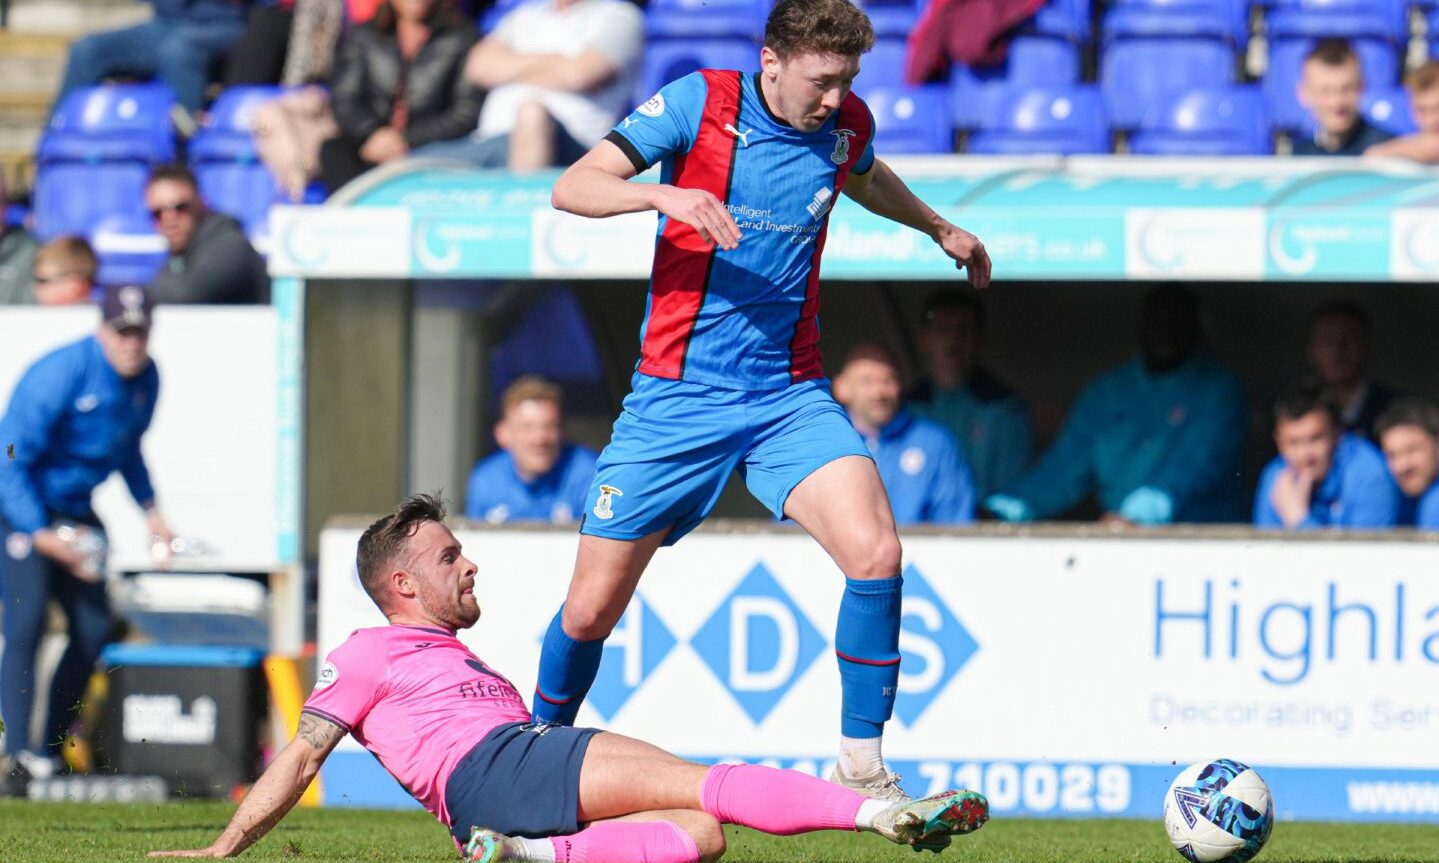 Nathan Shaw made potential count with bold move to Caley Thistle